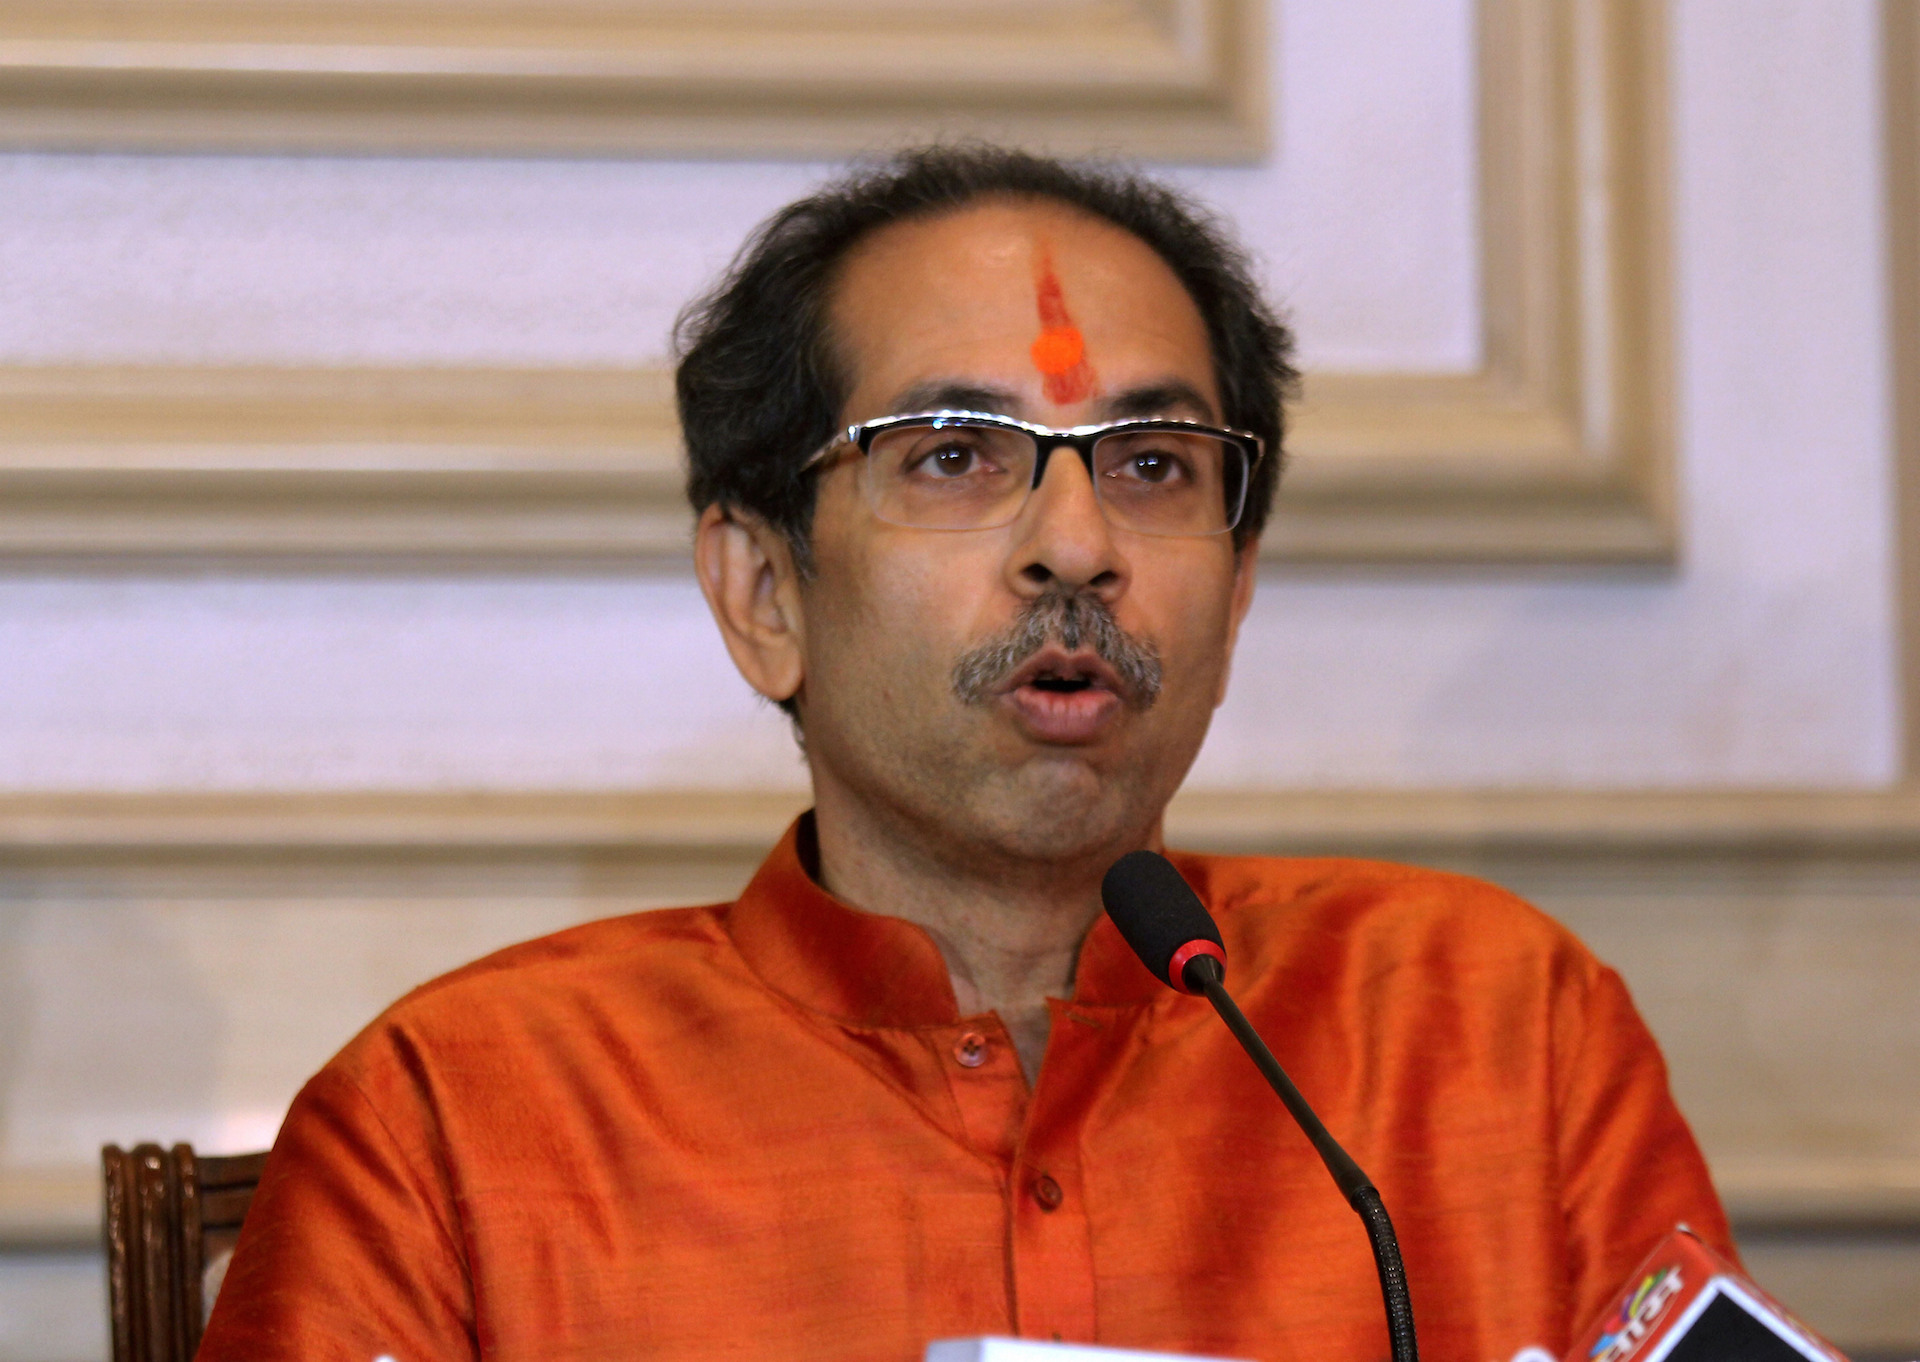 The Maharashtra government will also come out with a white paper on the financial condition of the state, chief minister Uddhav Thackeray said.